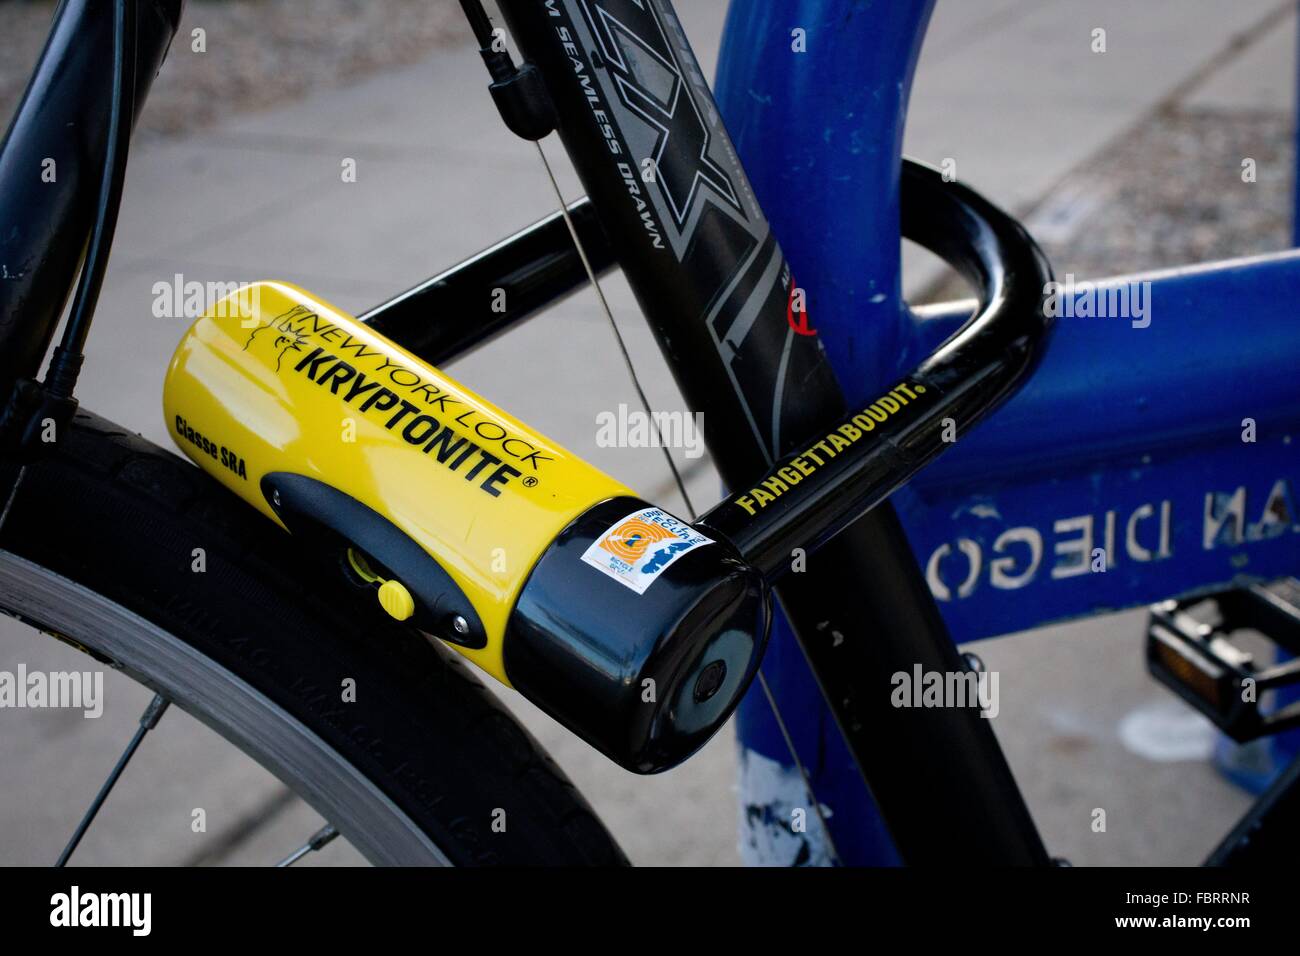 The "New York Fahgettaboudit Mini" U-lock by Kryptonite, weighing 4.55 lbs,  with 18mm hardened steel, has the a 10 out of 10 security level according  to the manufacturer, in Dec. 2015 Stock Photo - Alamy